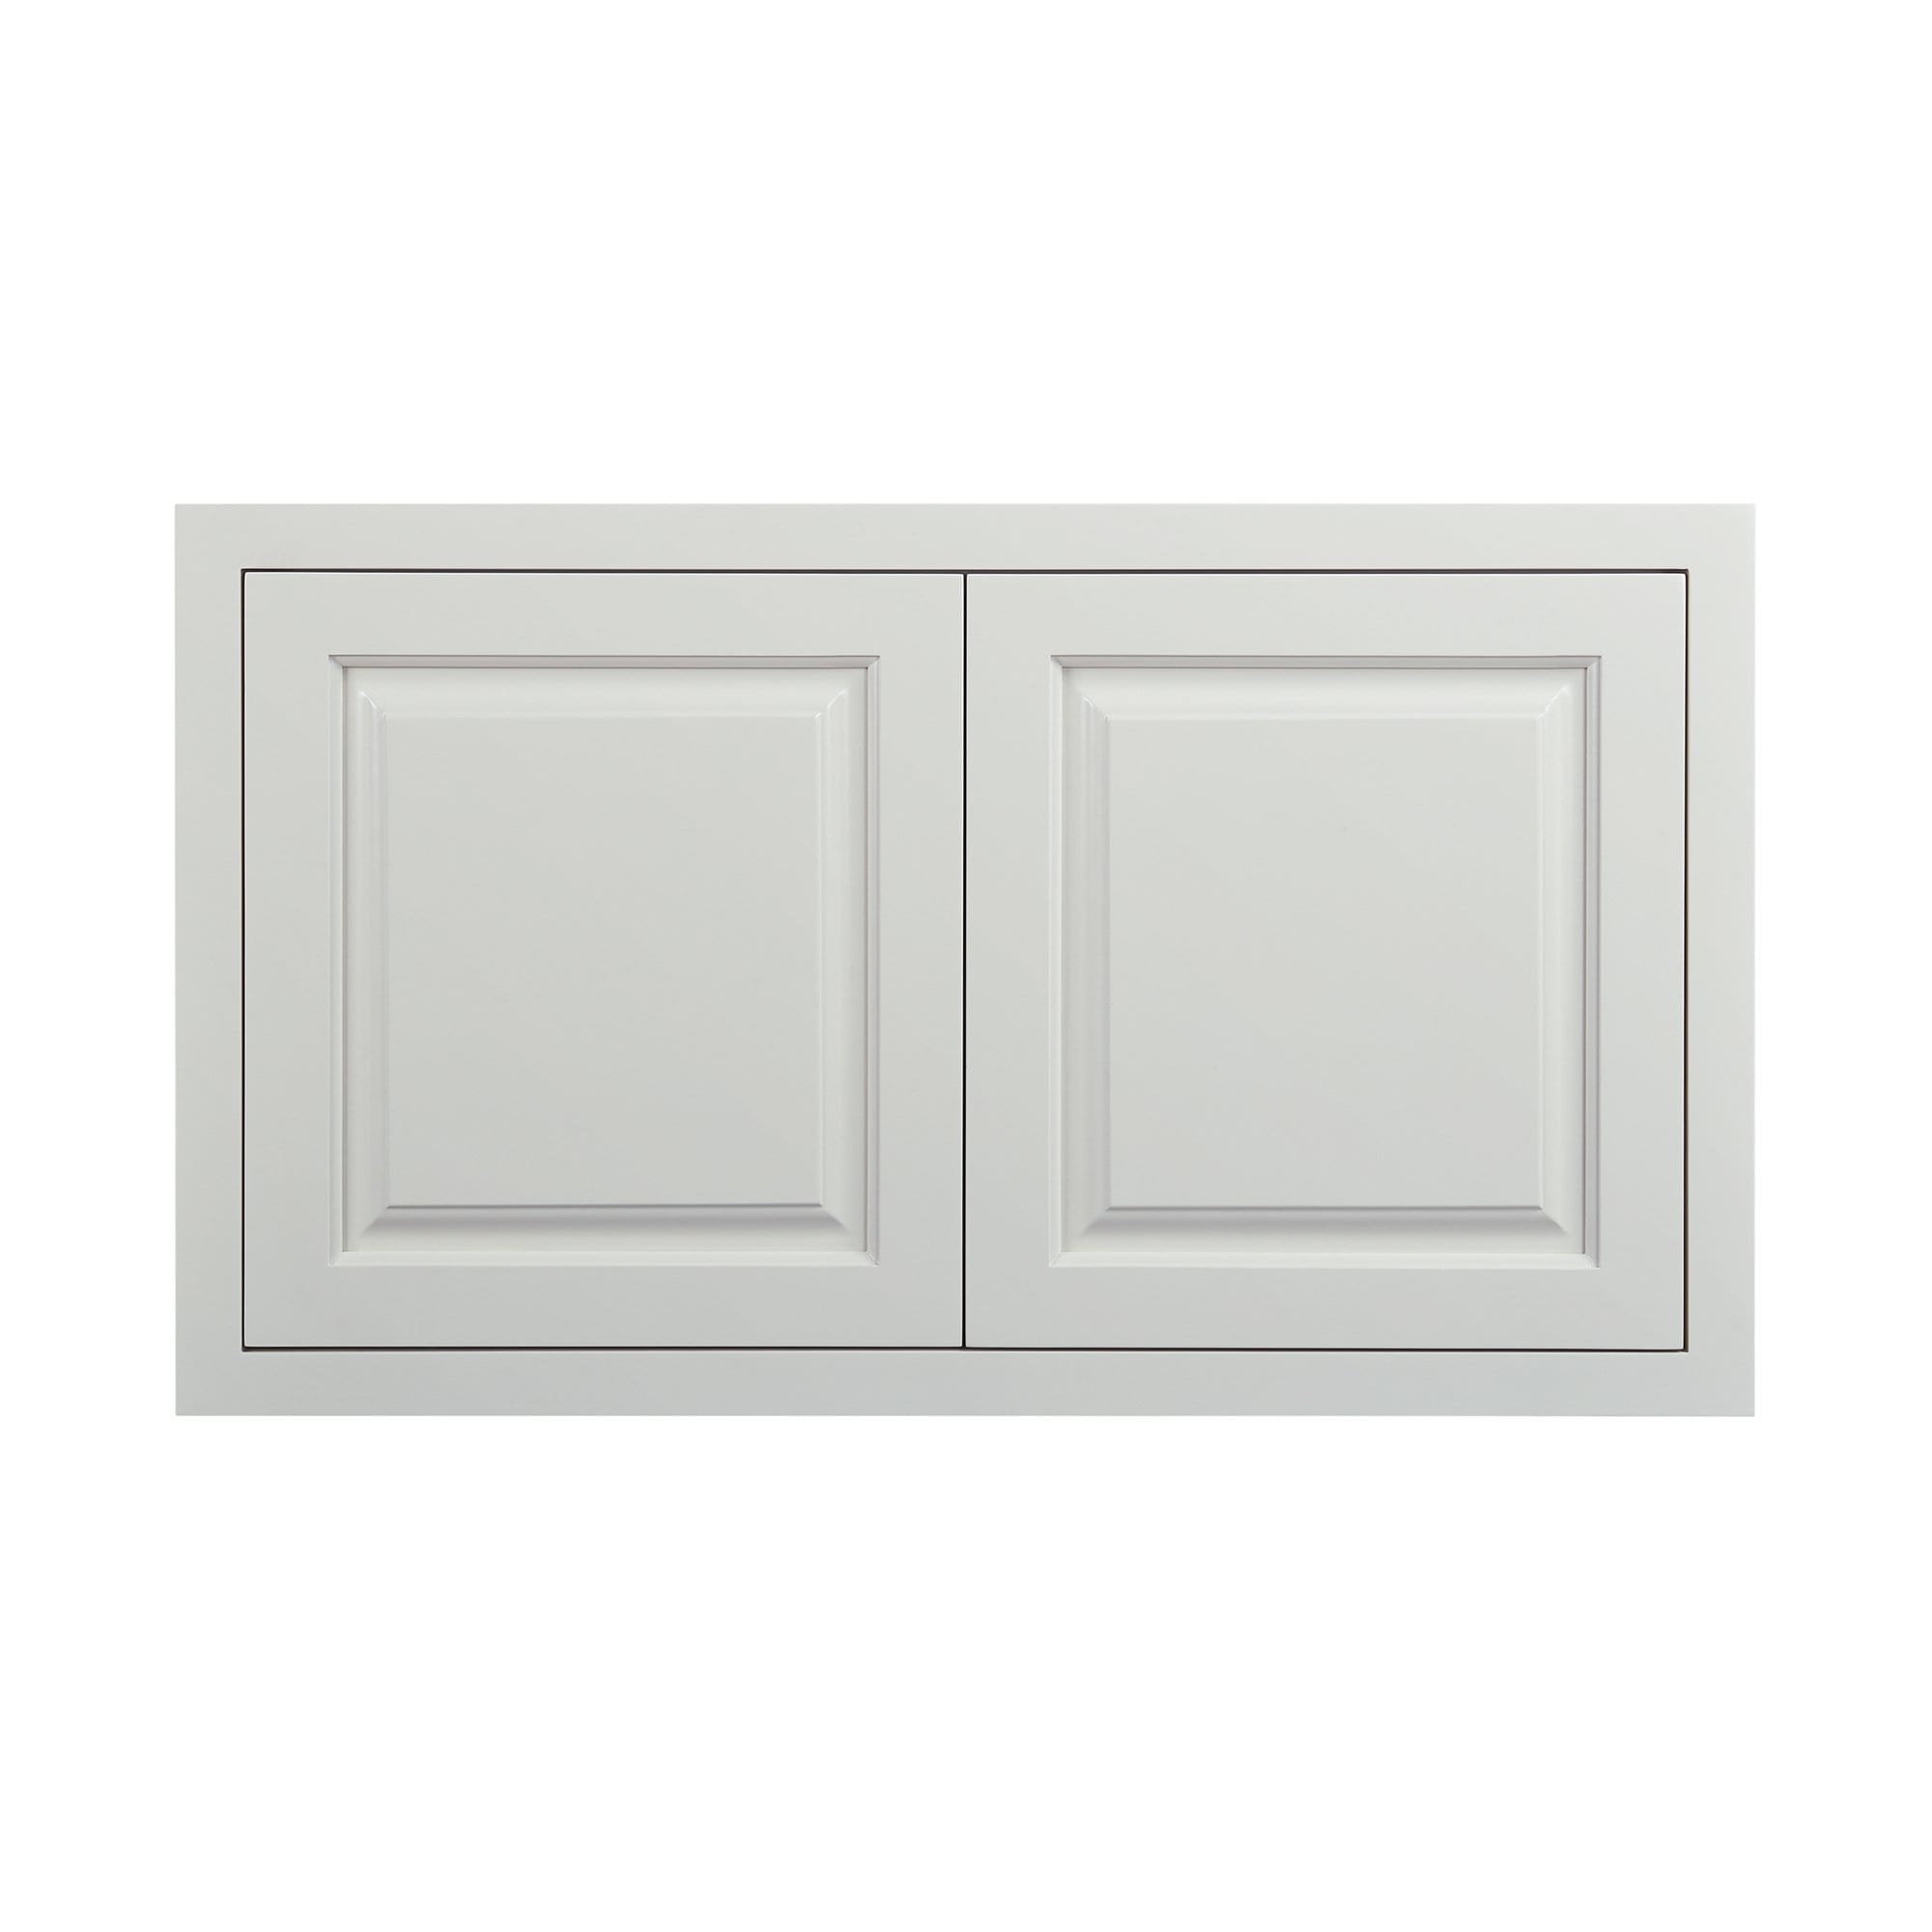 Wide Bridge Vintage White Inset Raised Panel Wall Cabinet - Double Door 12", 15", 18", 21"& 24" Tall